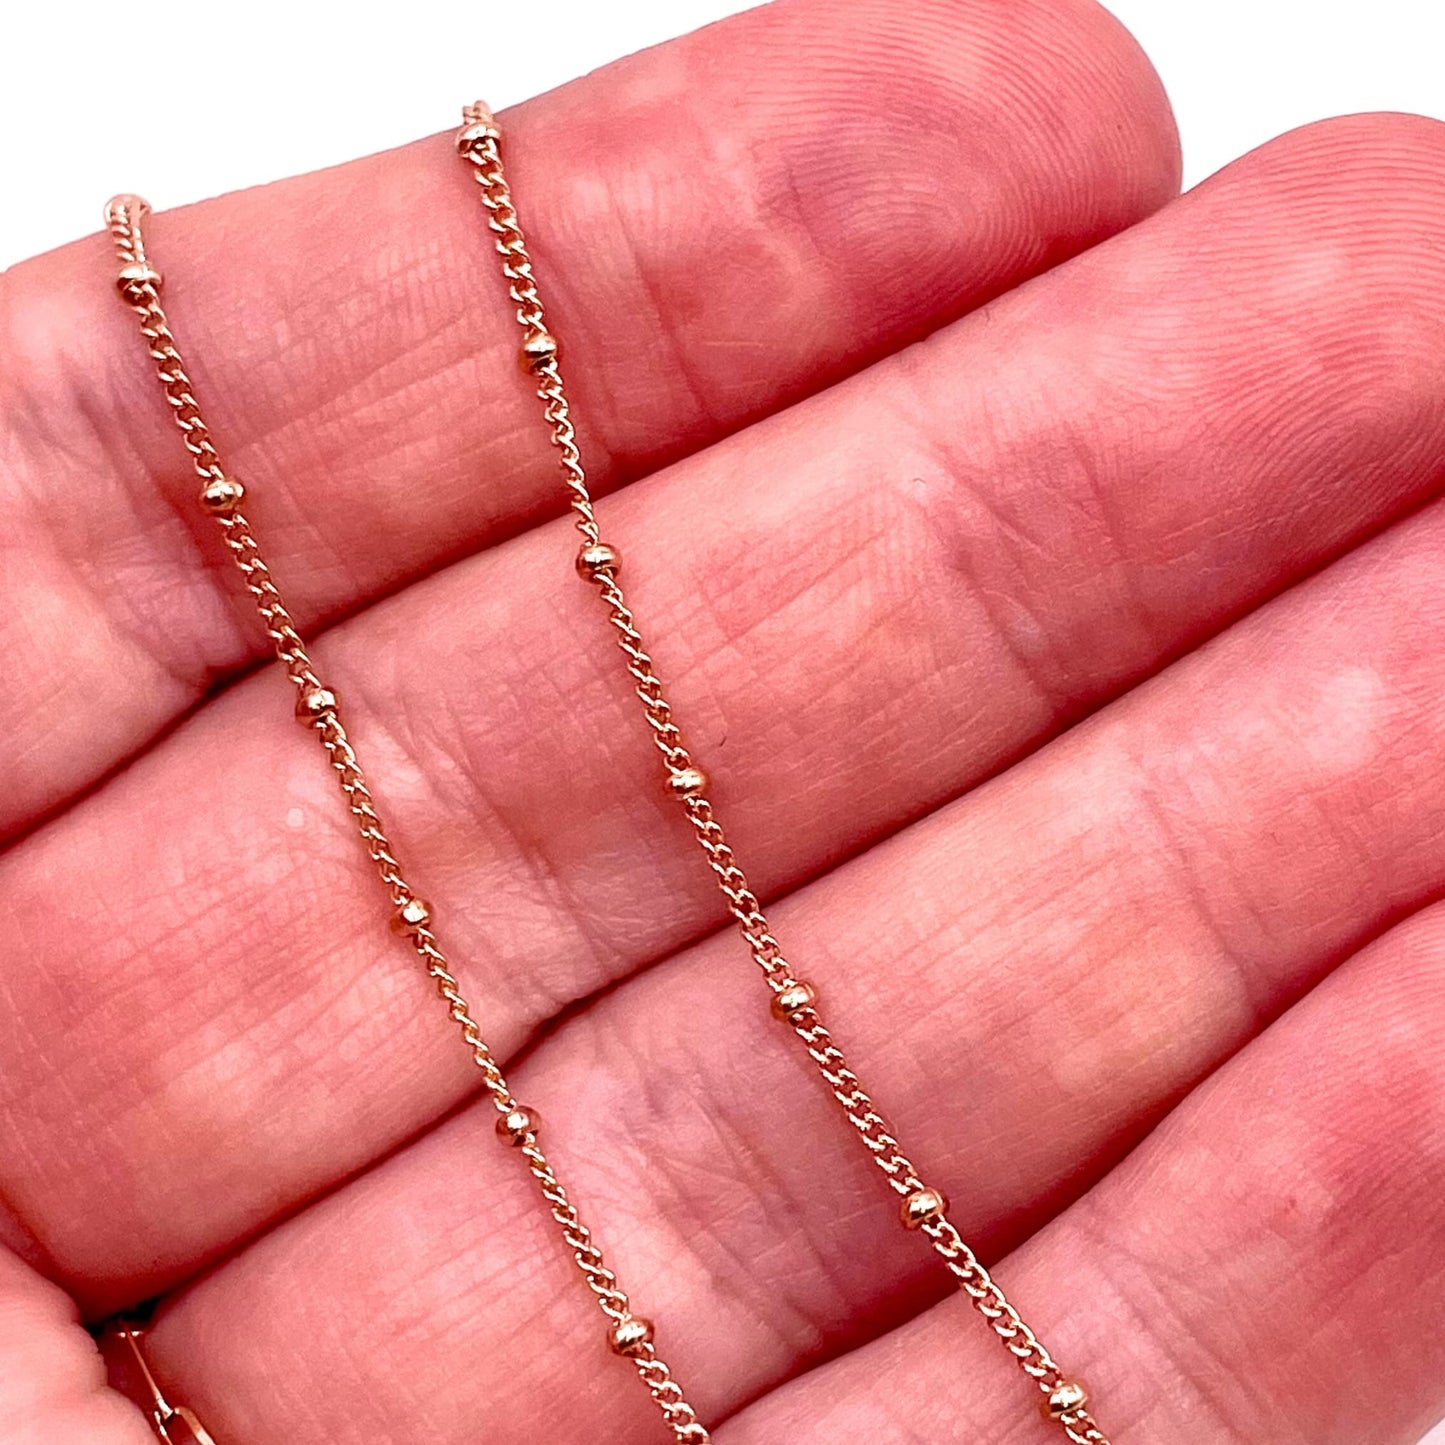 Actual photo of 14k rose gold filled satellite chain for permanent jewelry.